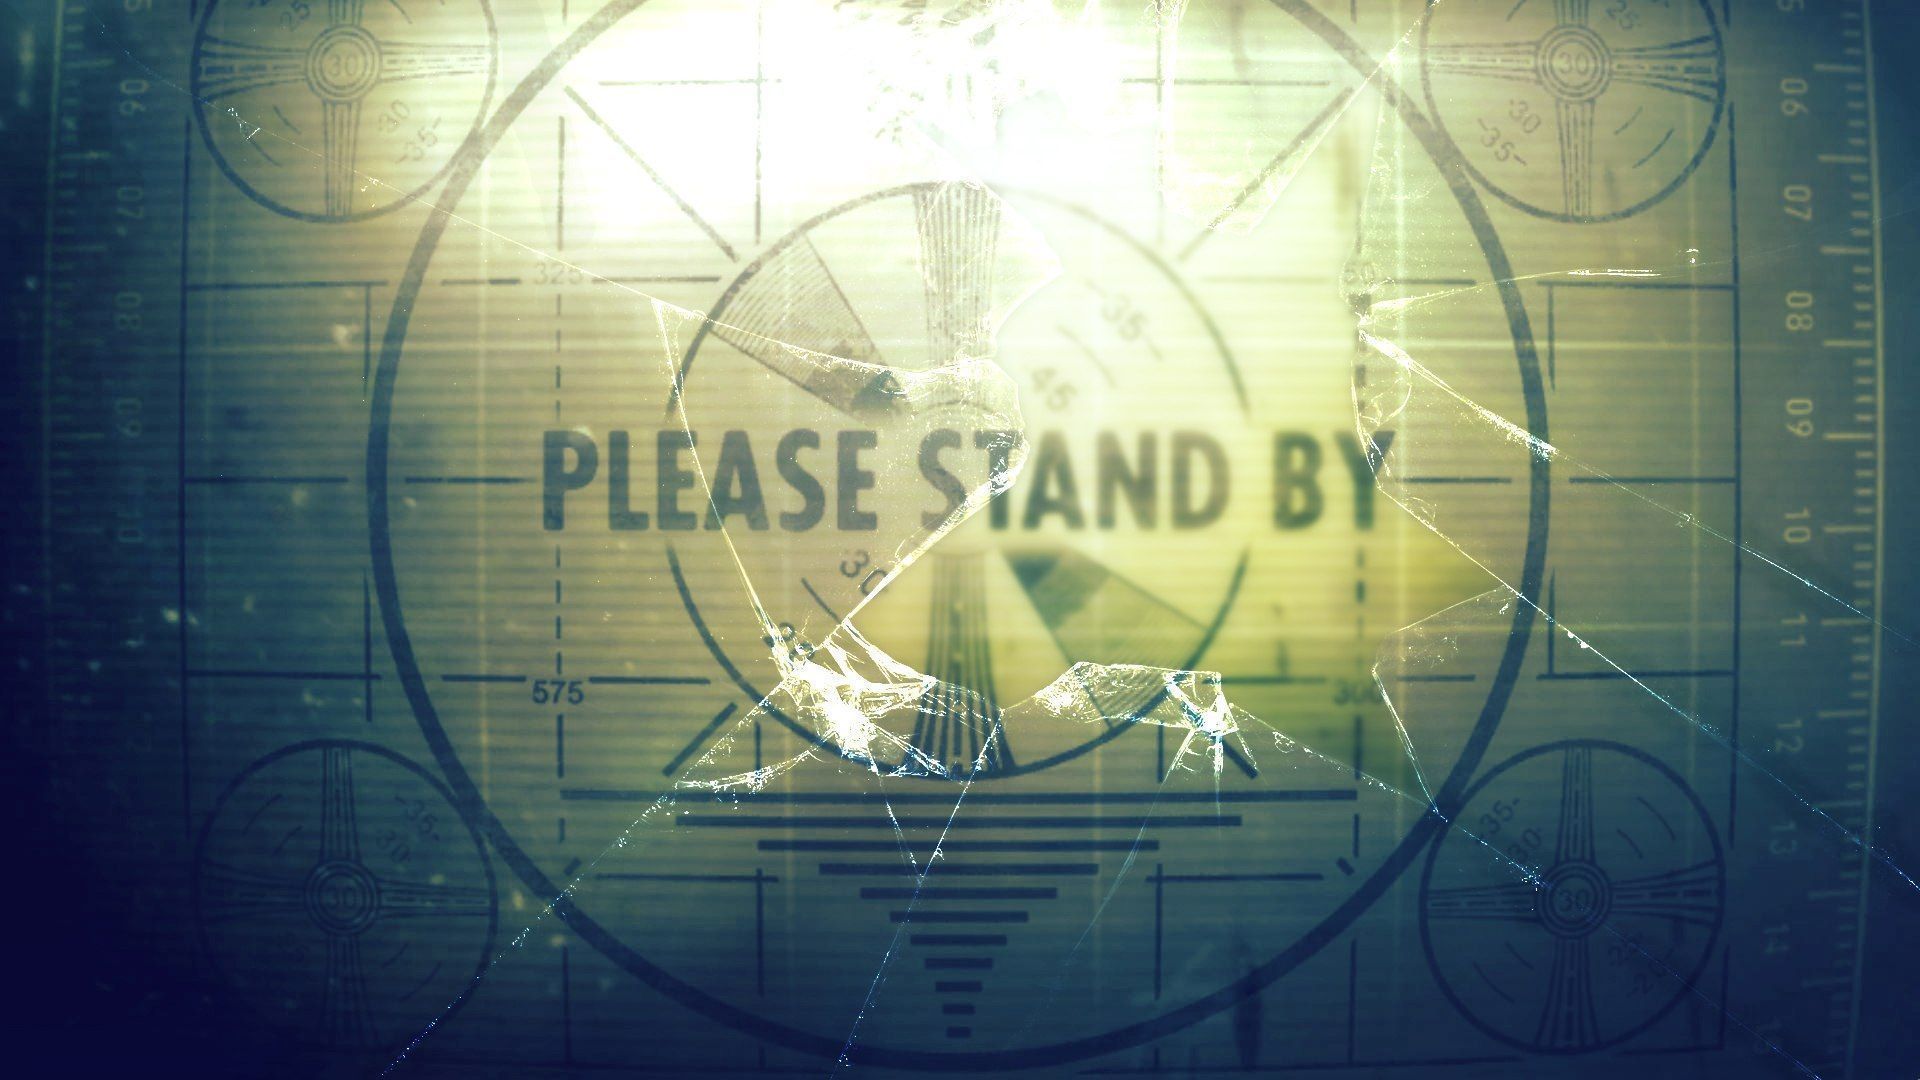 Fallout wallpaper 1920x1080 - (#32912) - High Quality and ...